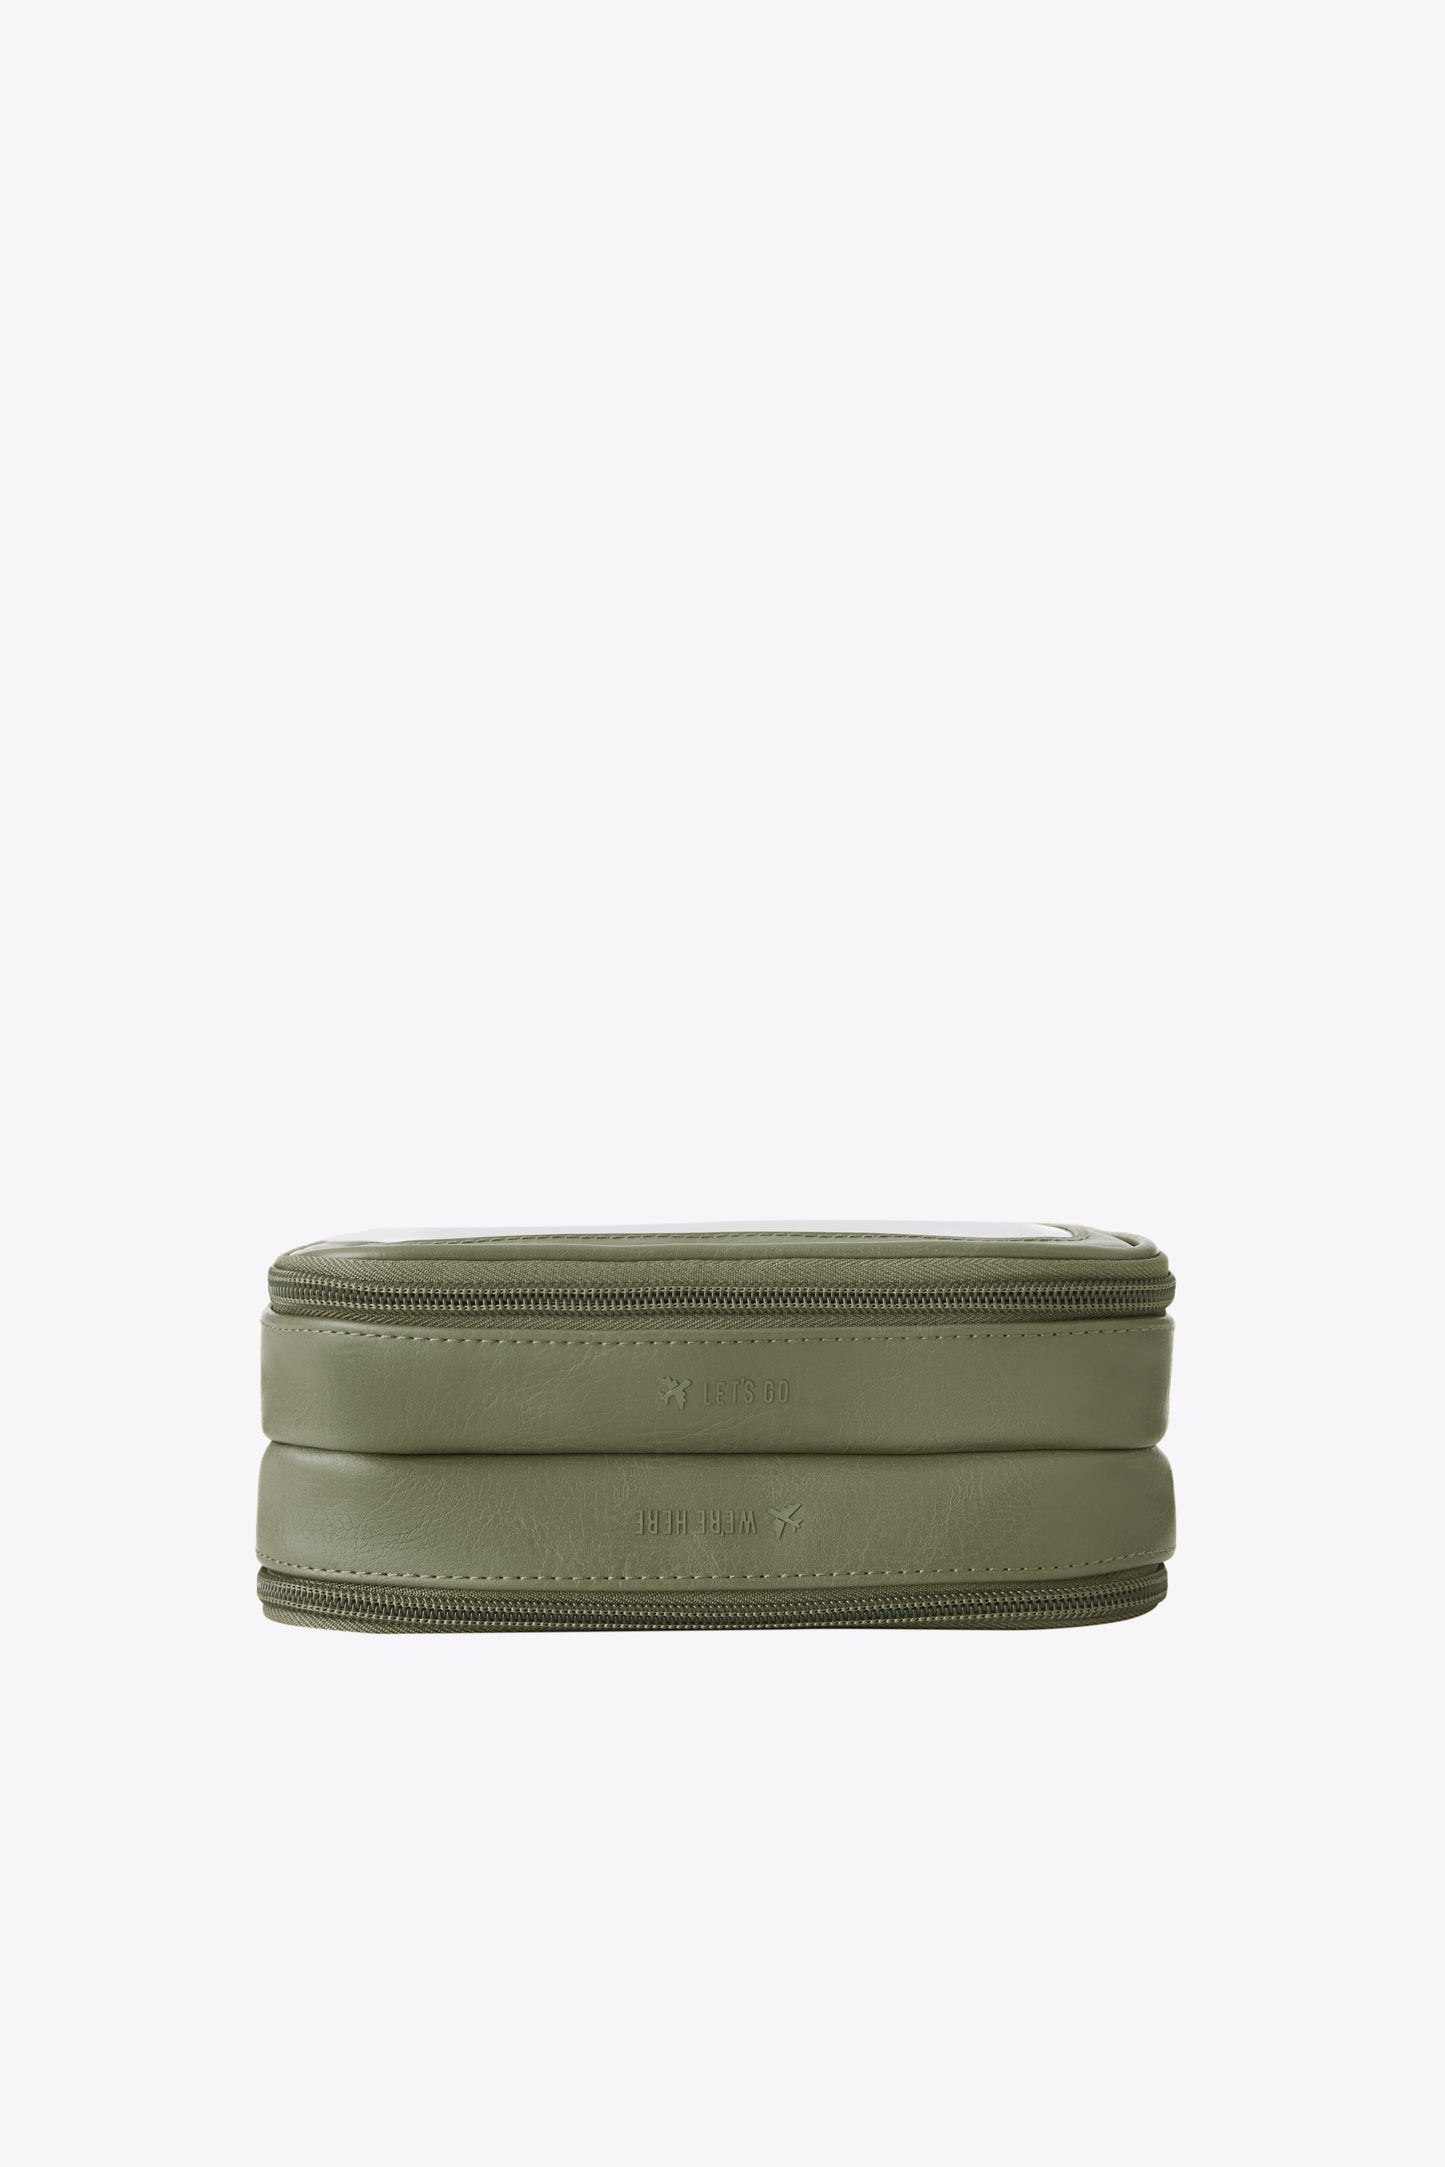 The On The Go Essential Case in Olive